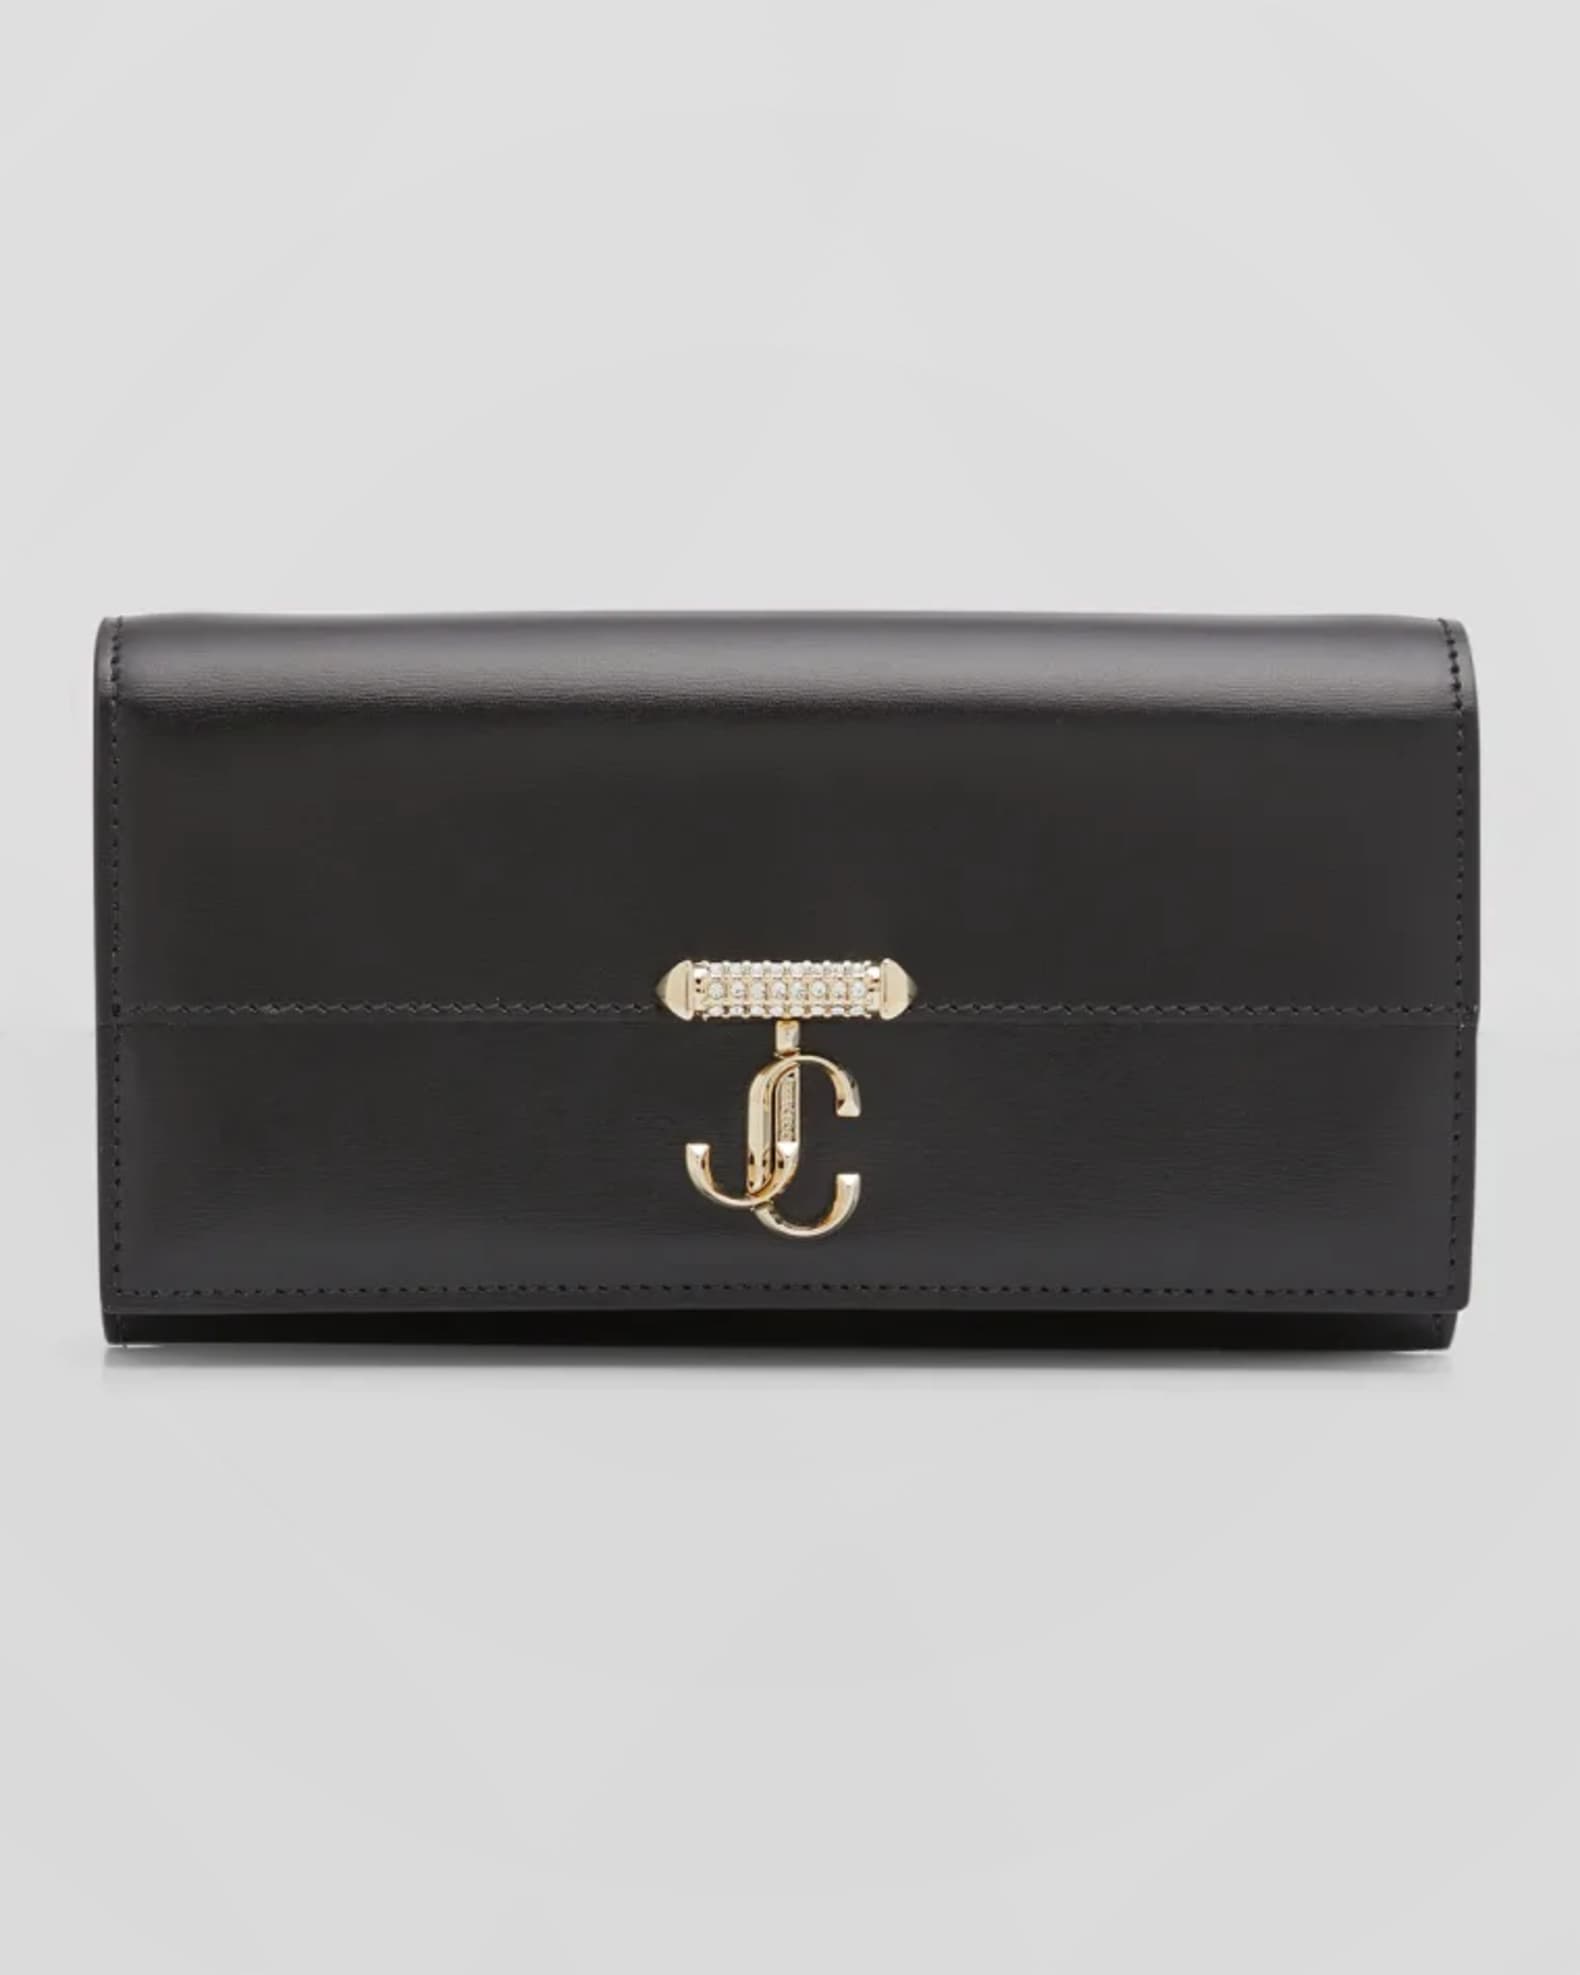 Jimmy Choo Varenne Leather Wallet with Embellished Strap | Neiman Marcus